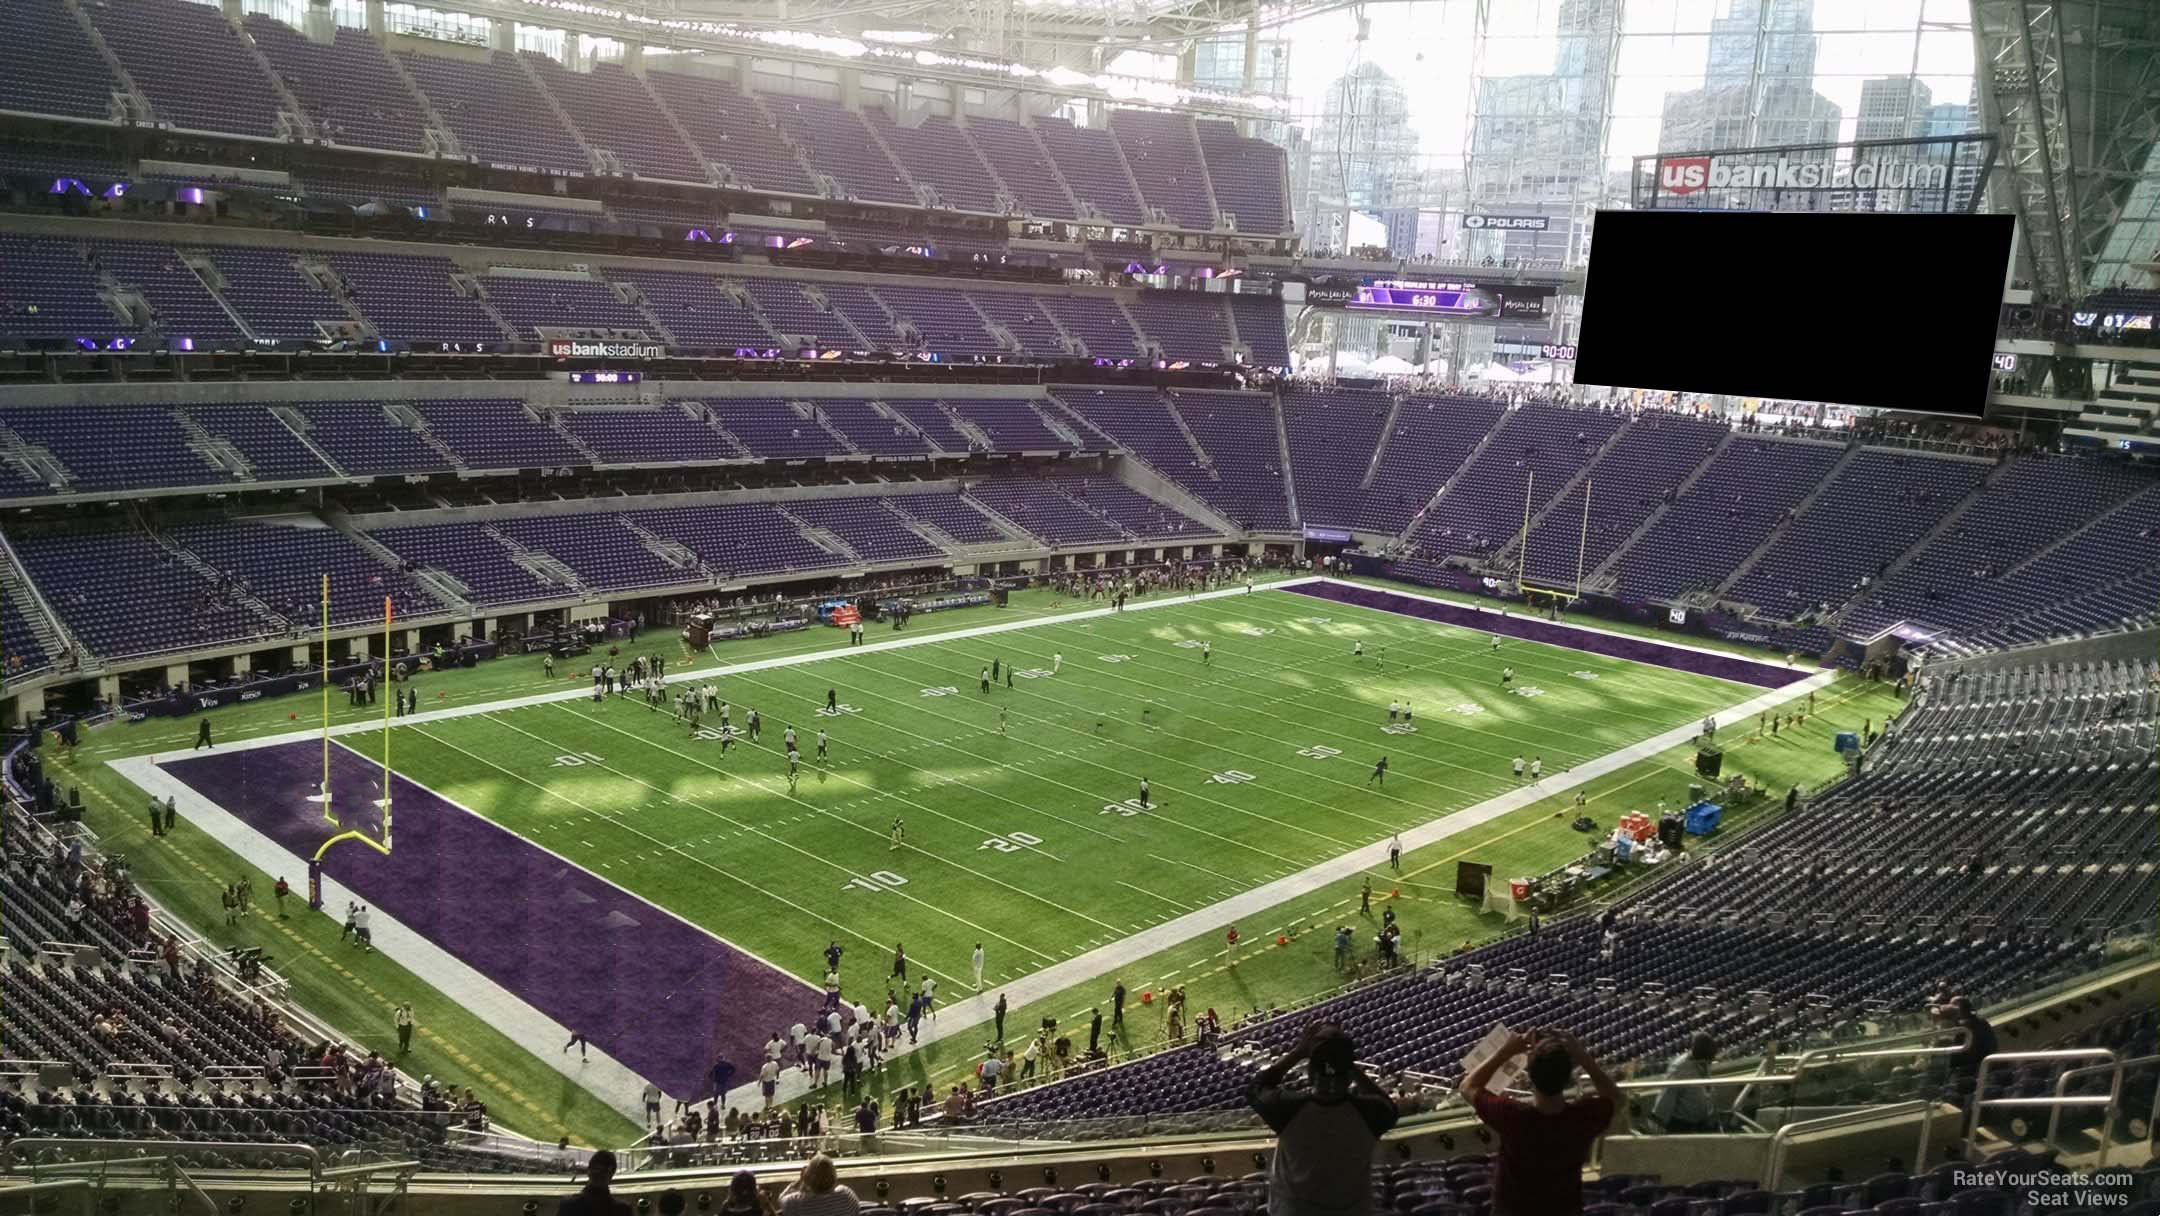 section 218, row 15 seat view  for football - u.s. bank stadium